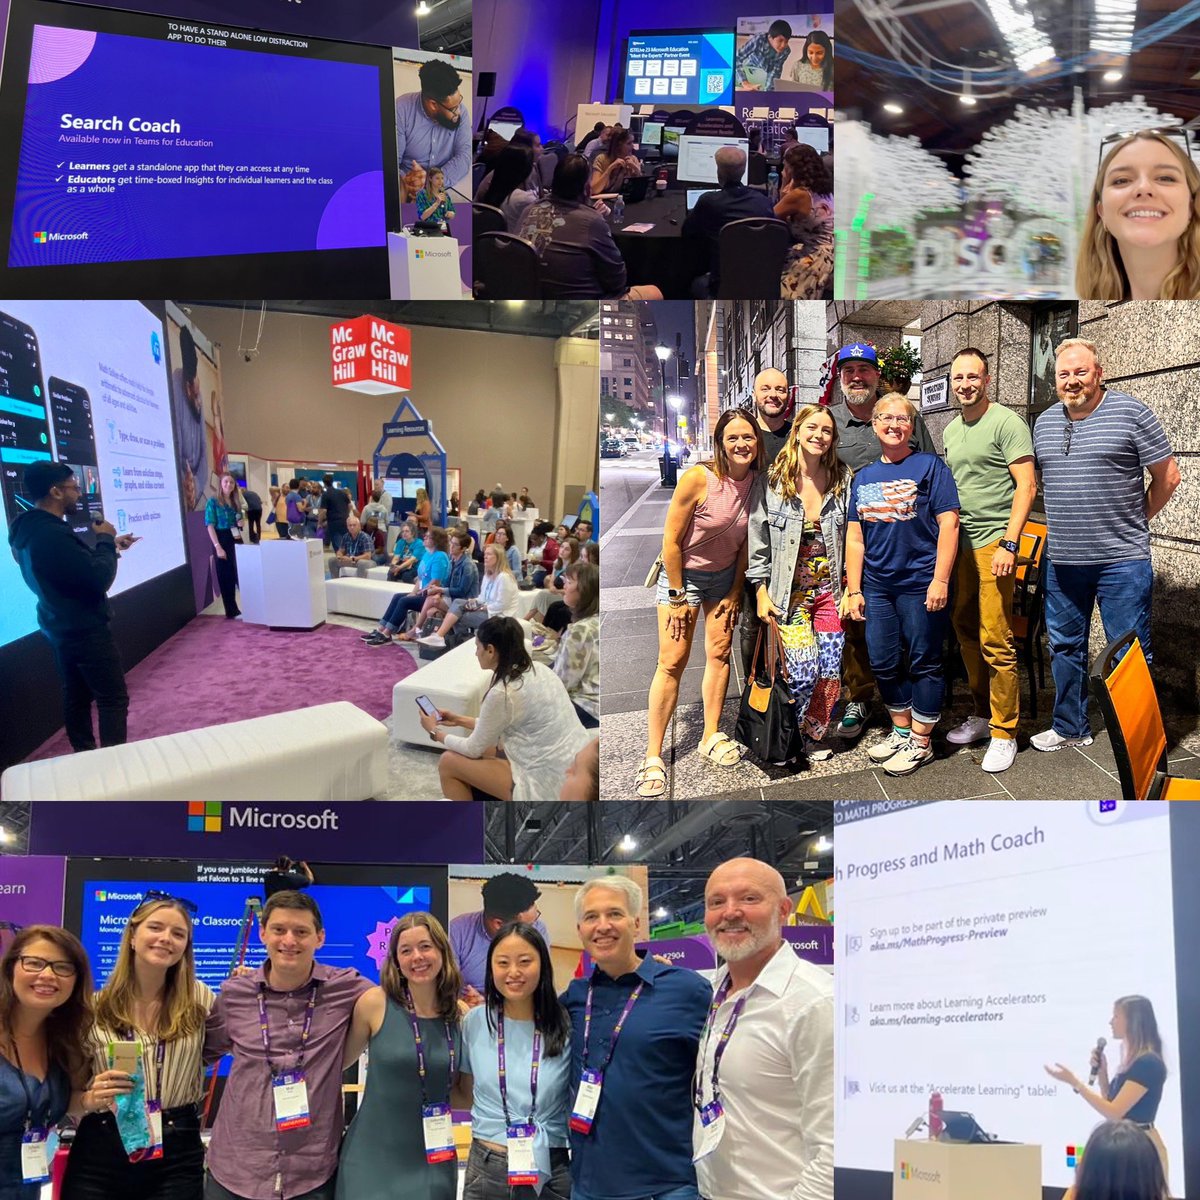 Wow, #ISTELive!! What a joy to spend last week in the midst of all that energy. 

So grateful for my amazing @MicrosoftEDU teammates, for all the warm and endlessly encouraging audience members, and for every incredible educator who makes up this community. You inspire me! 🌻